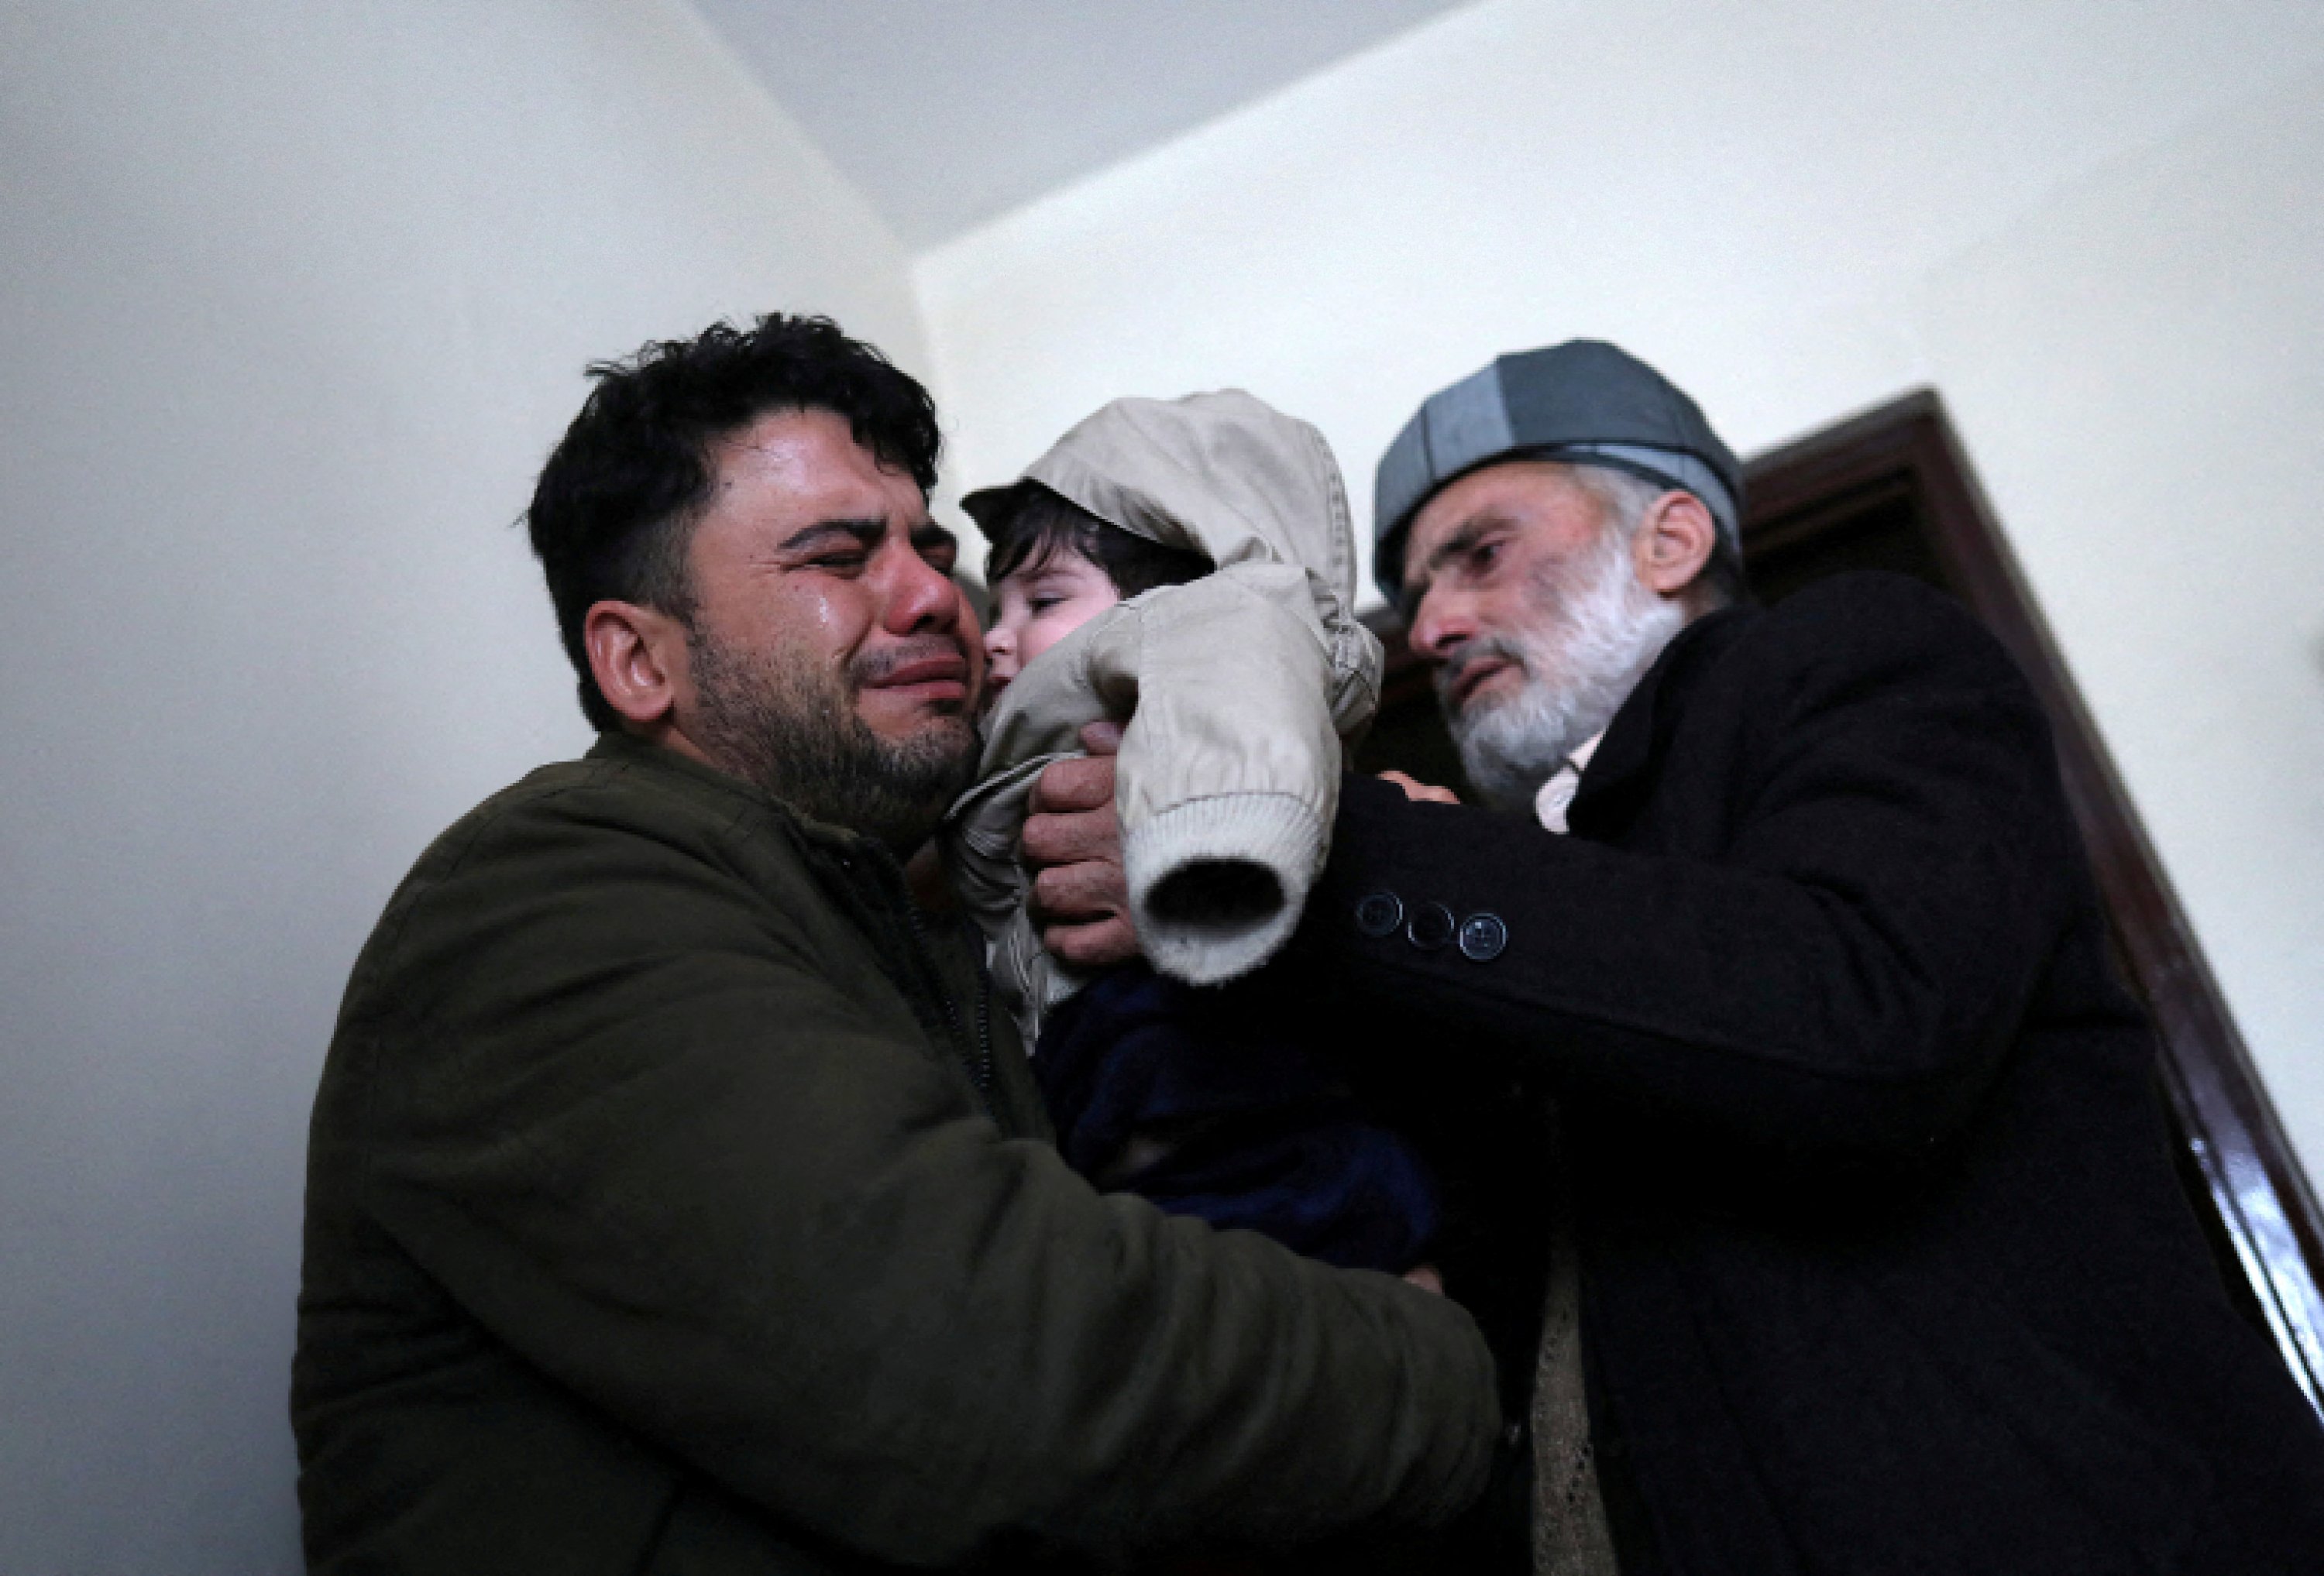 Hamid Safi, a 29-year-old taxi driver who had found baby Sohail Ahmadi in the airport, cries as he hands over Sohail to his grandfather Mohammad Qasem Razawi in Kabul, Afghanistan, Jan. 8, 2022. (Reuters Photo)